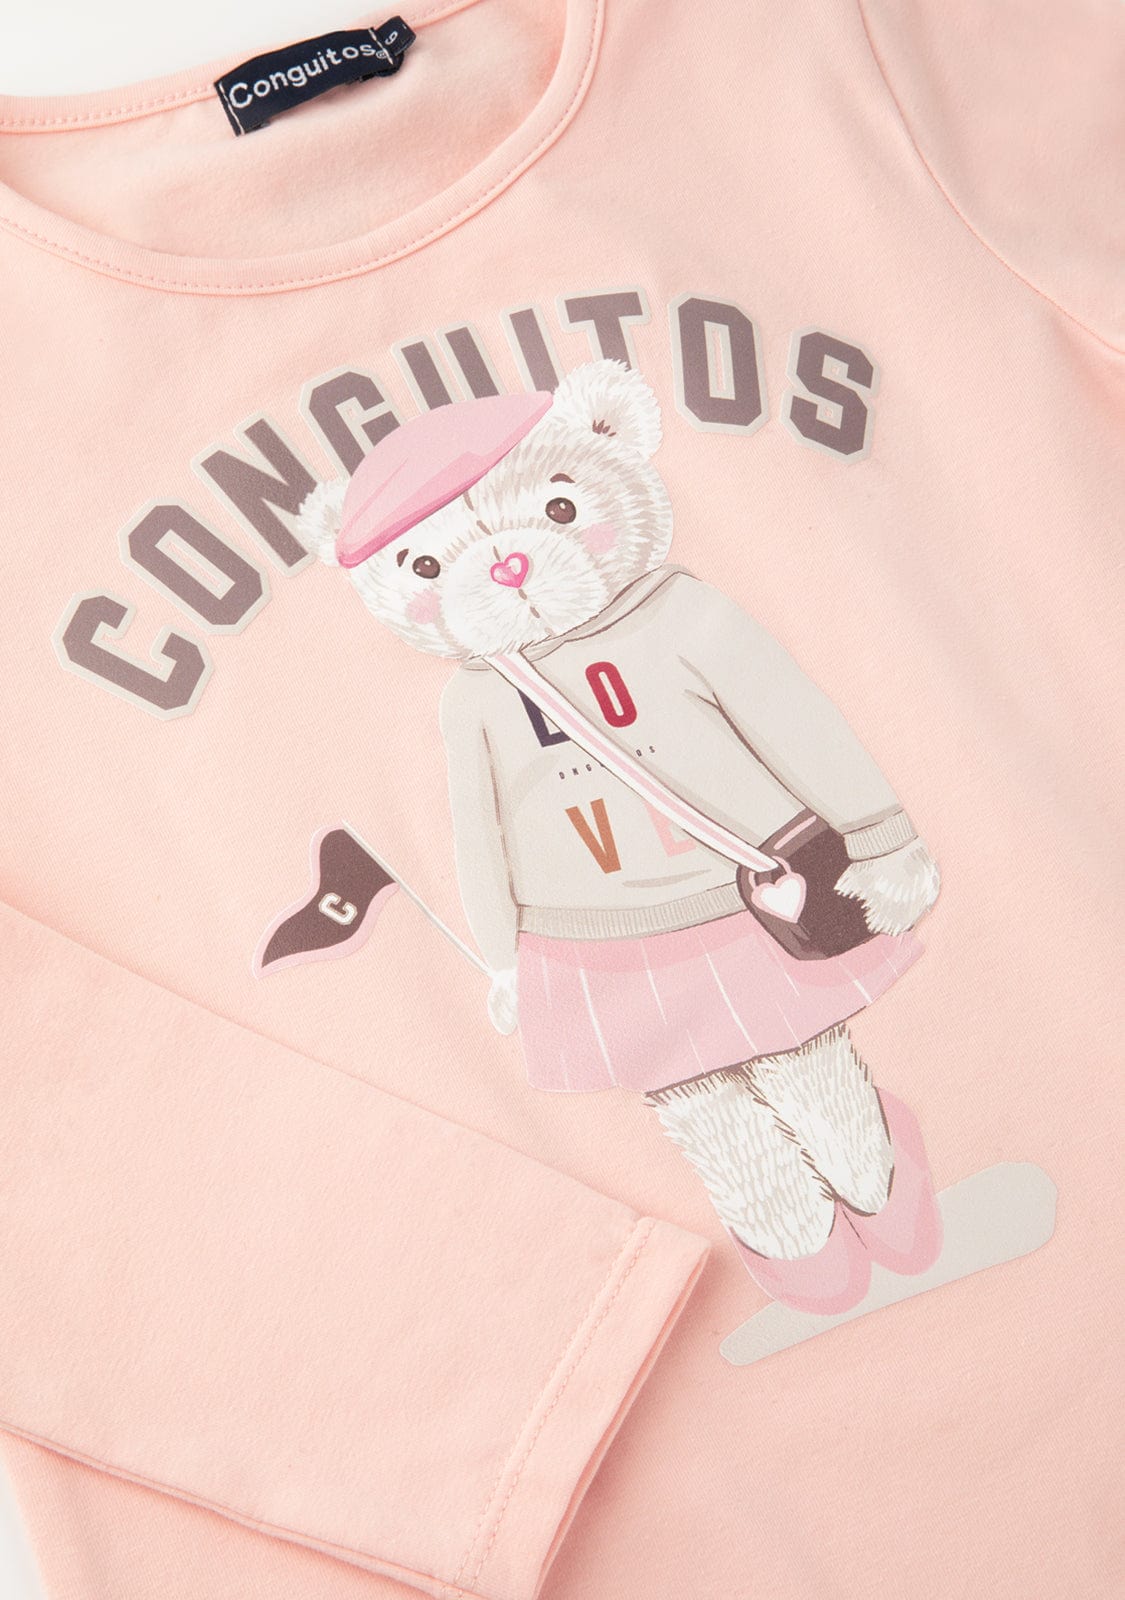 CONGUITOS TEXTIL Clothing Girl's Pink Teddy University T-Shirt